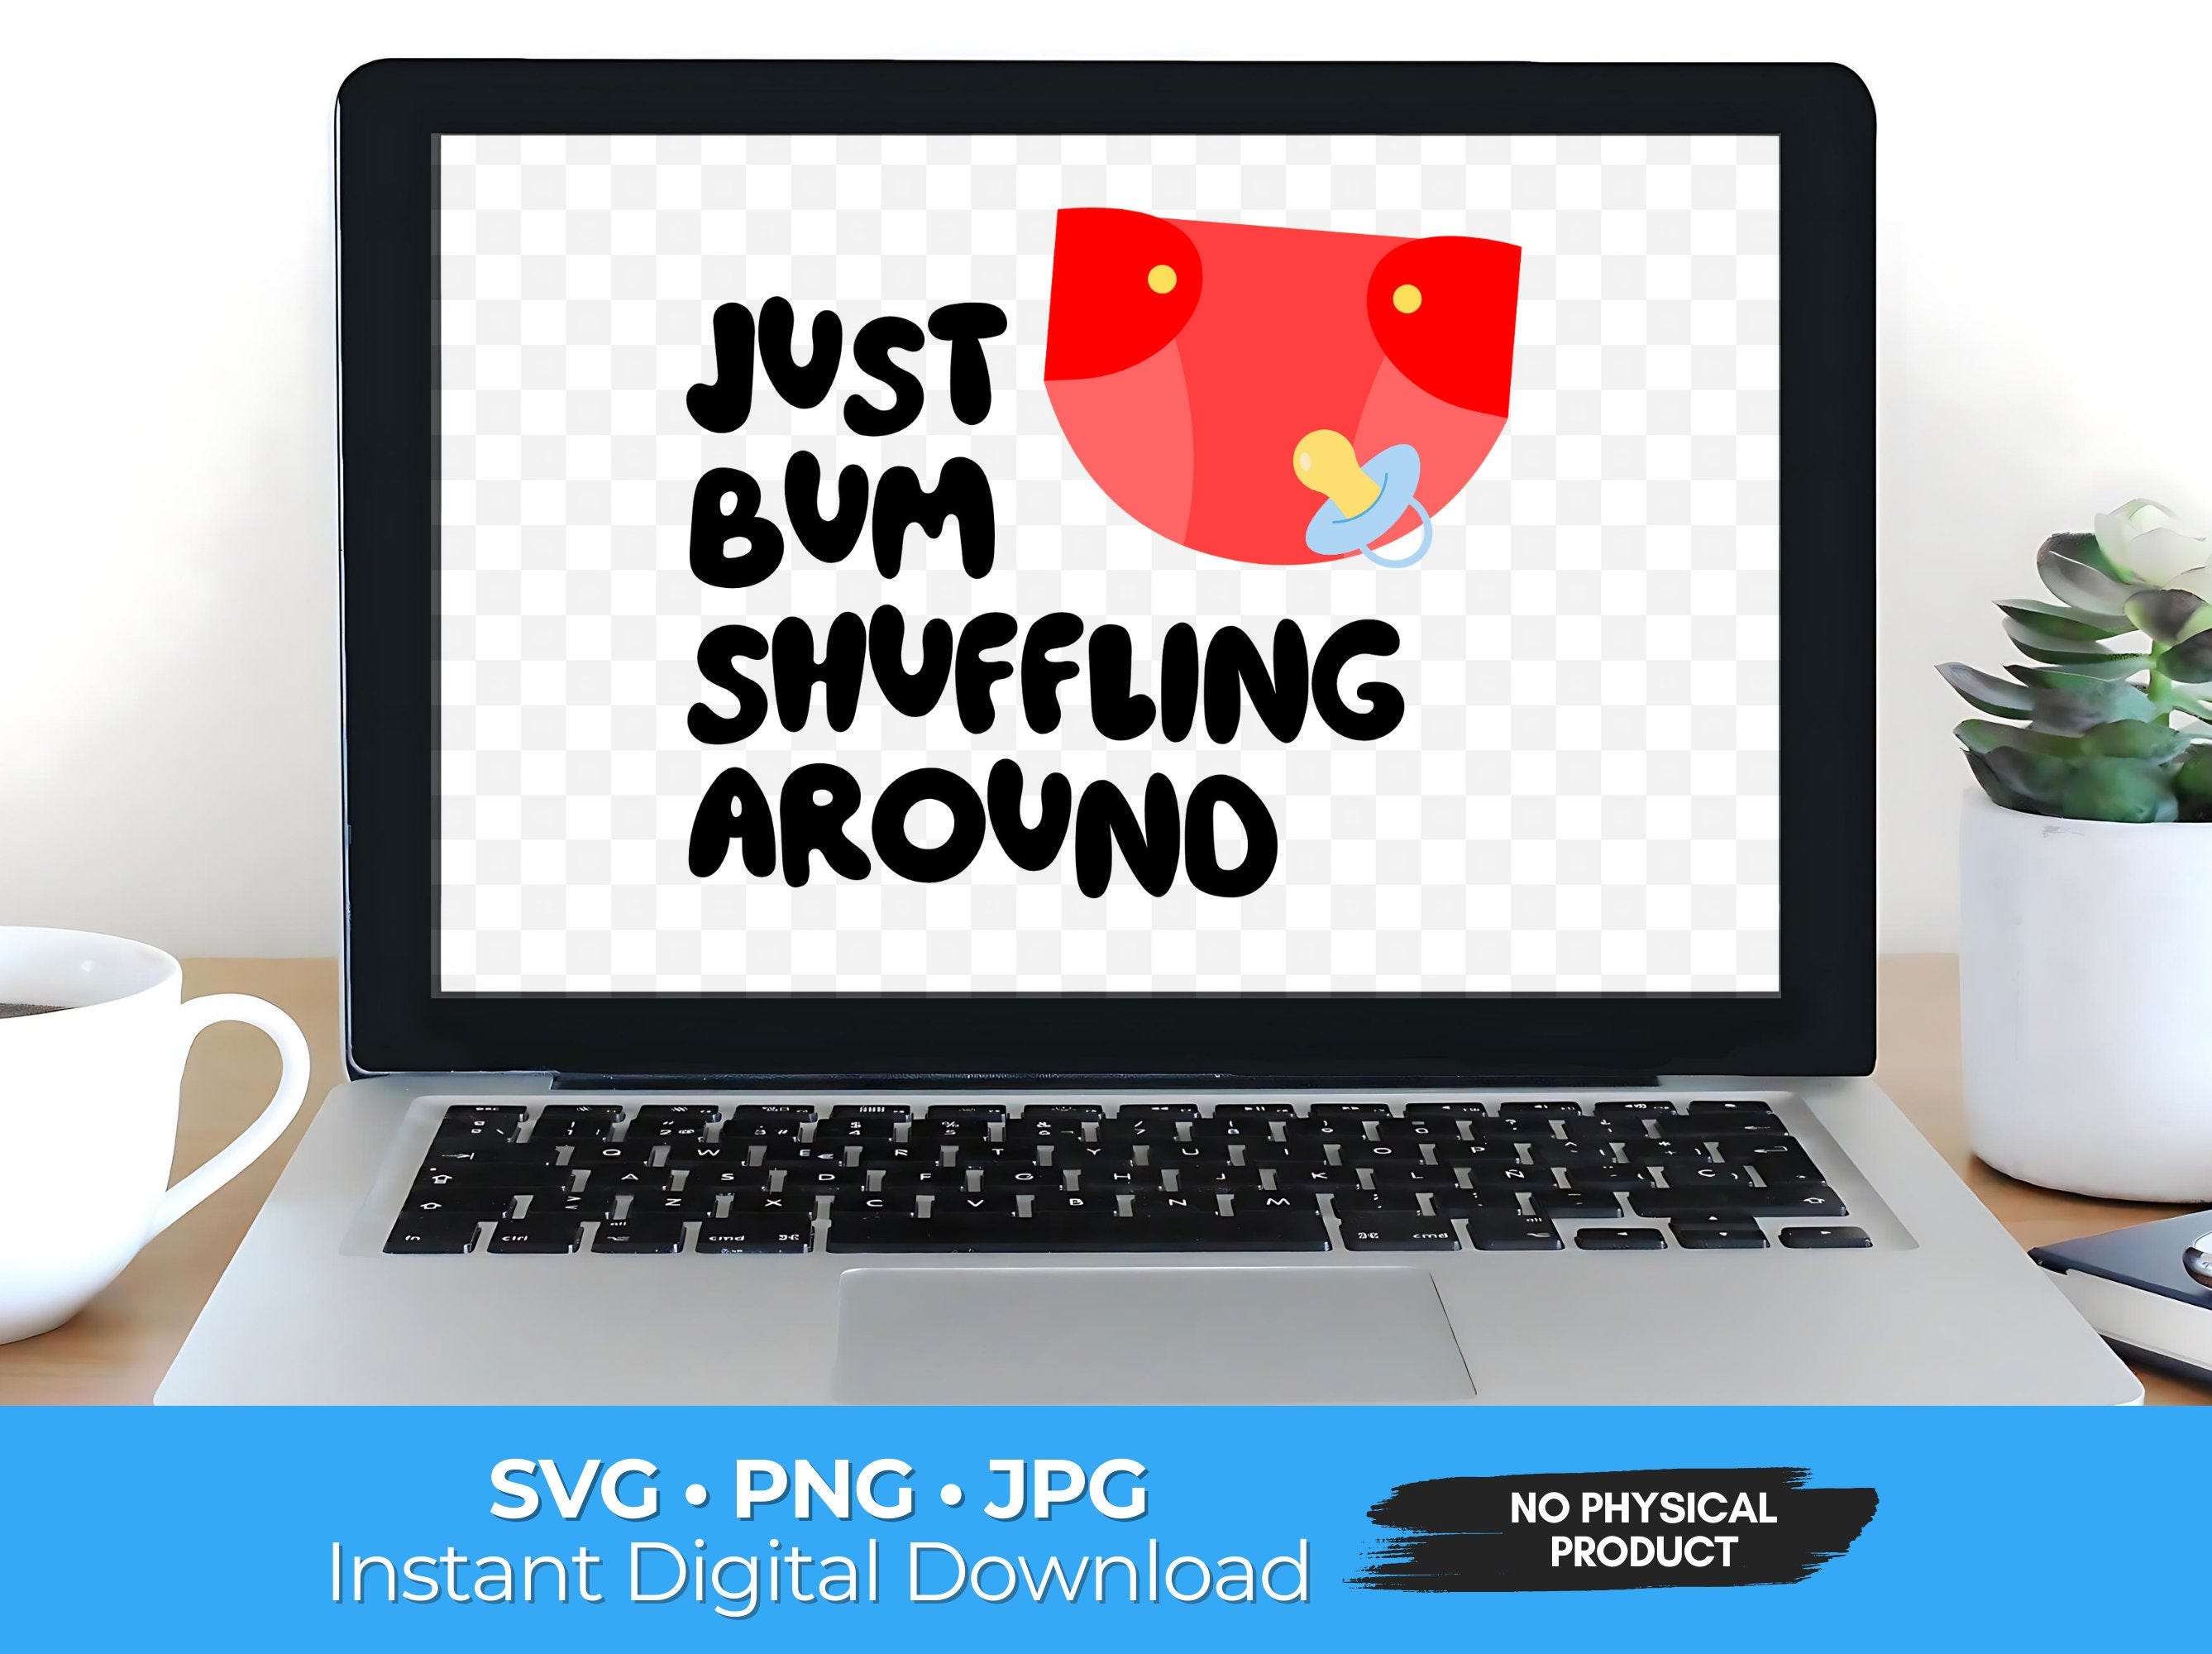 Bluey Bum Shuffling SVG PNG JPG Digital Downloads for T-Shirts, Bags, Tumblers & More + 10% Goes to Charity!